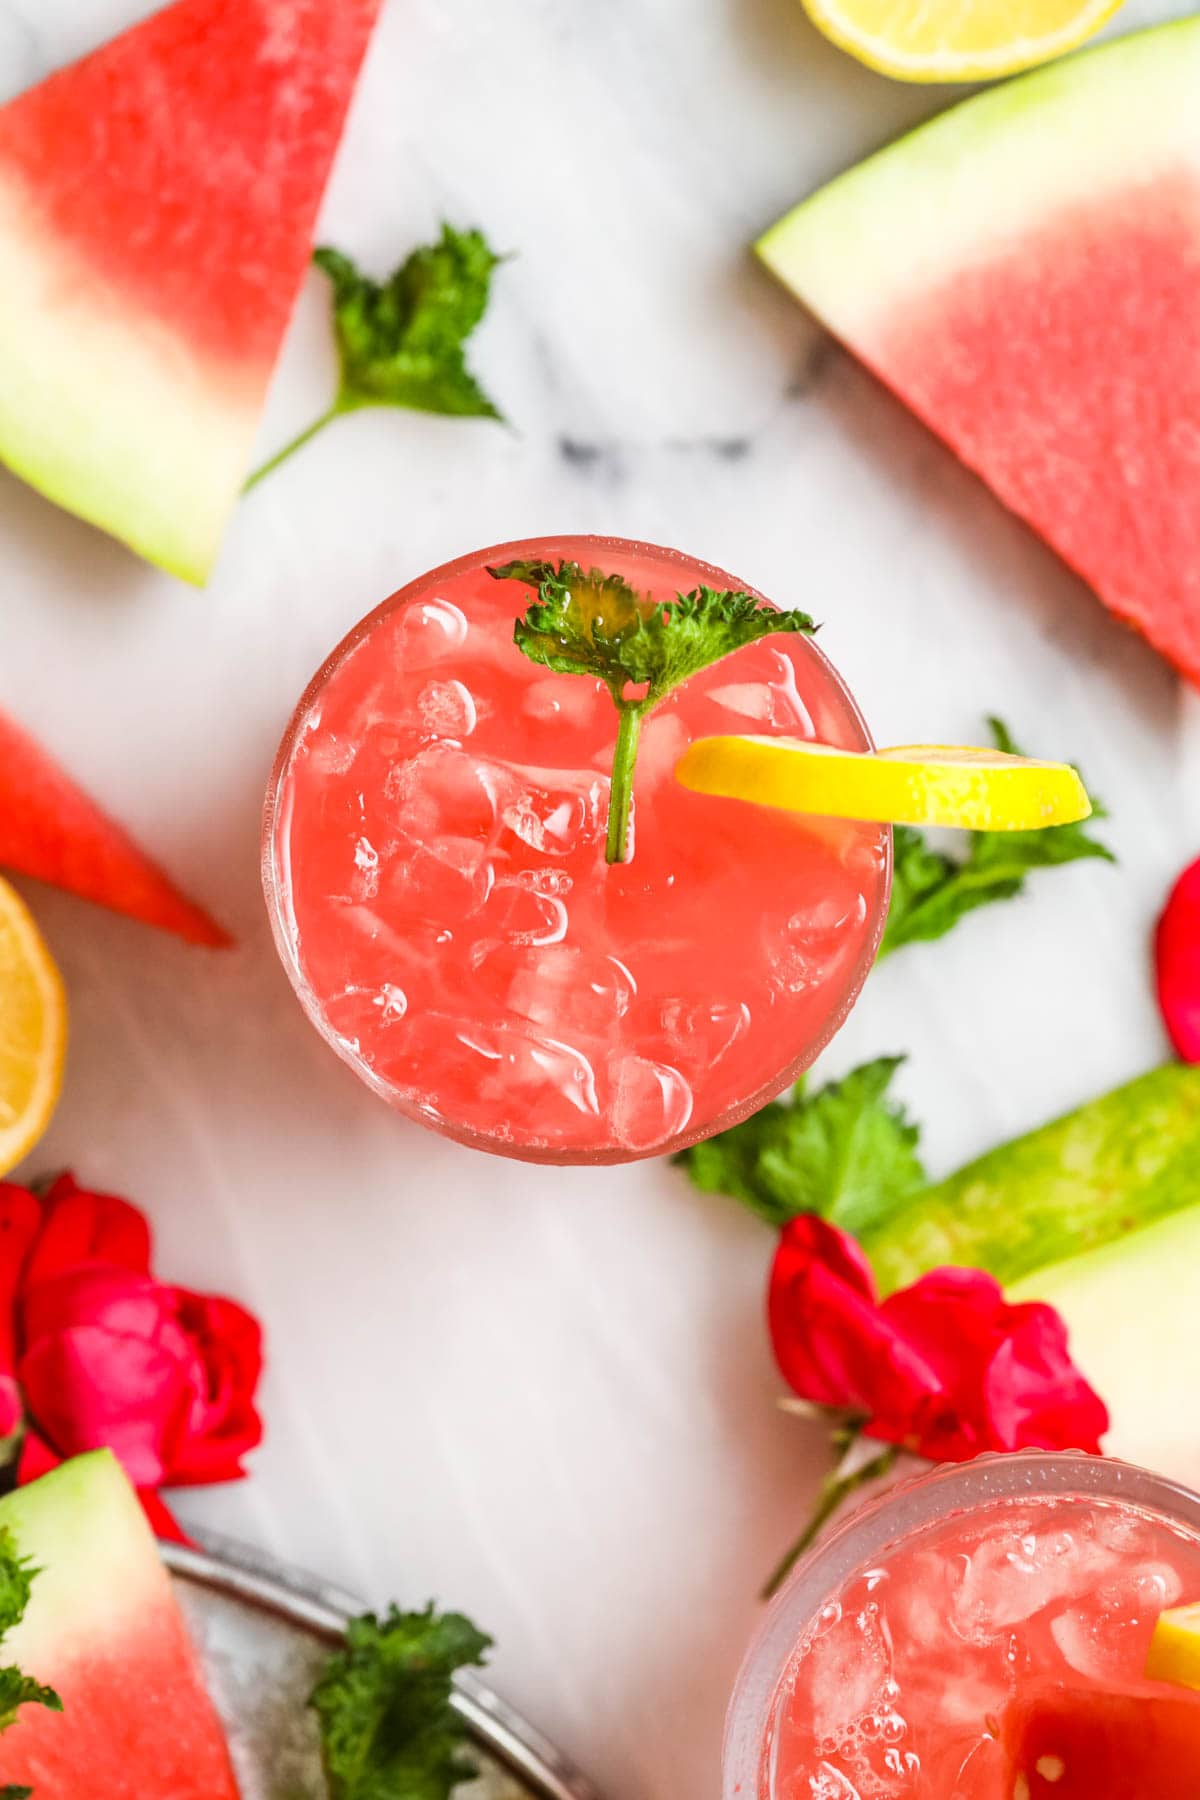 Overhead view of a glass of watermelon lemonade surrounded by watermelon slices.